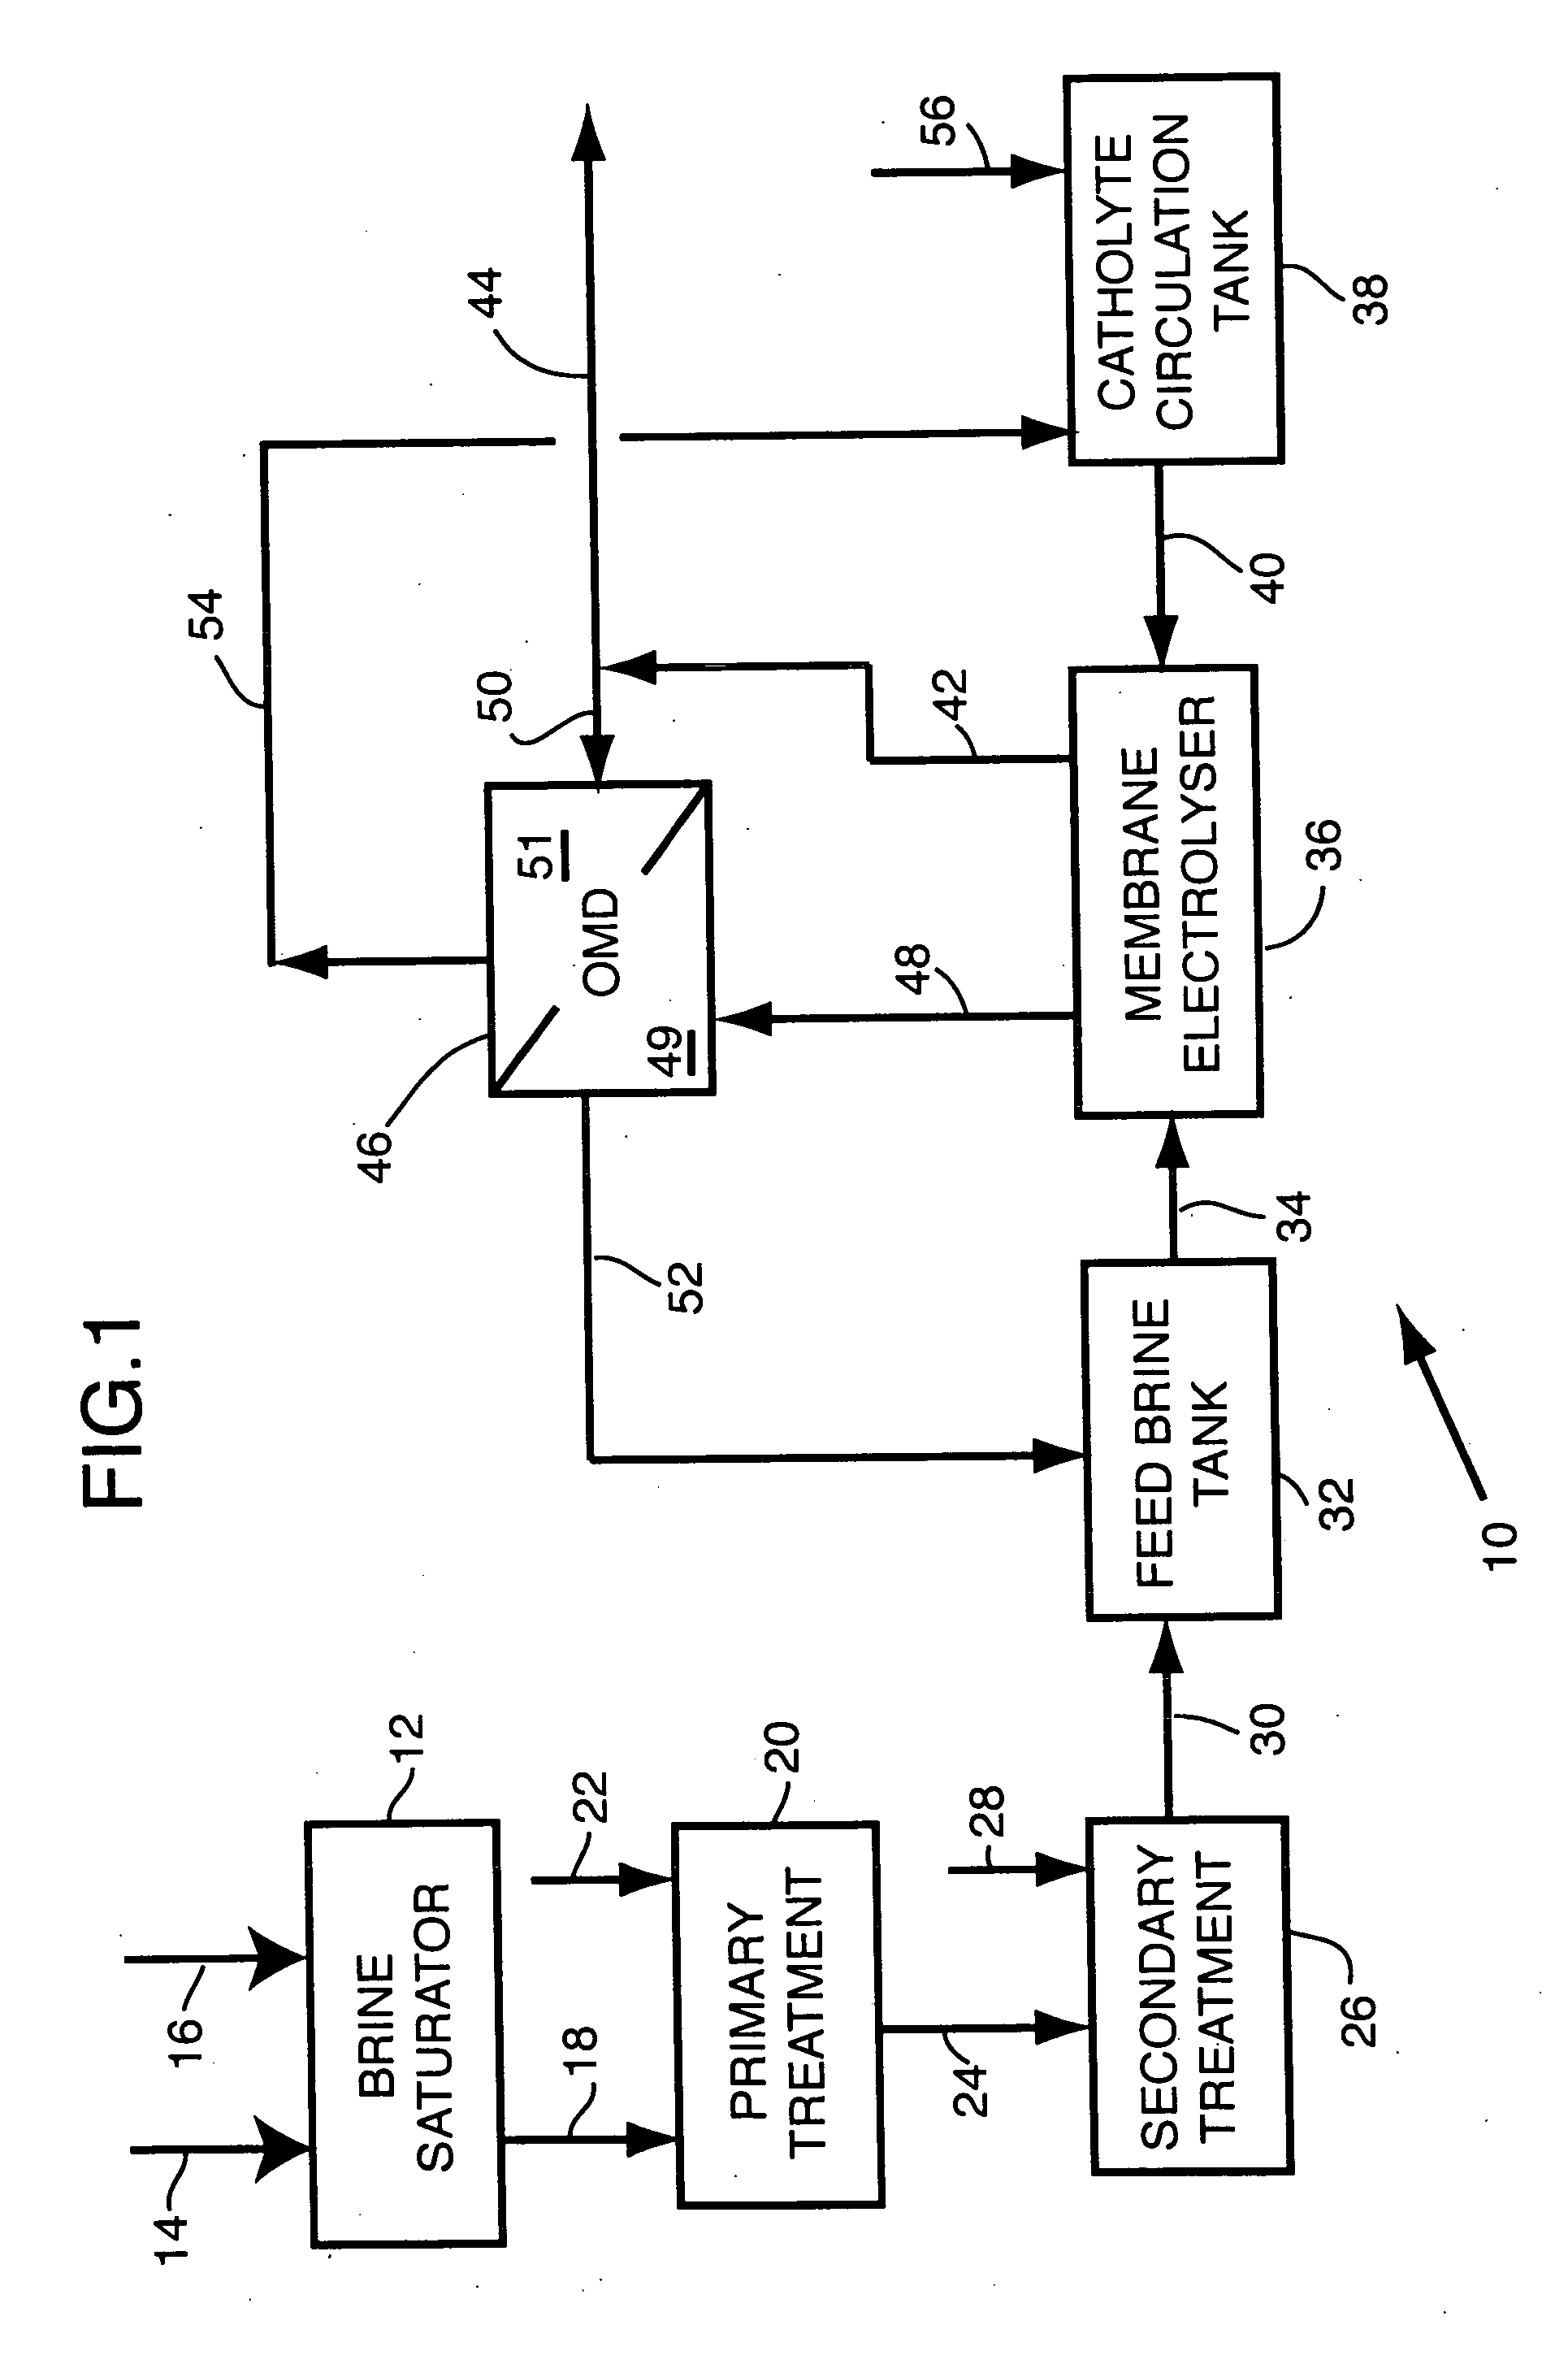 Apparatus and method for osmotic membrane distillation